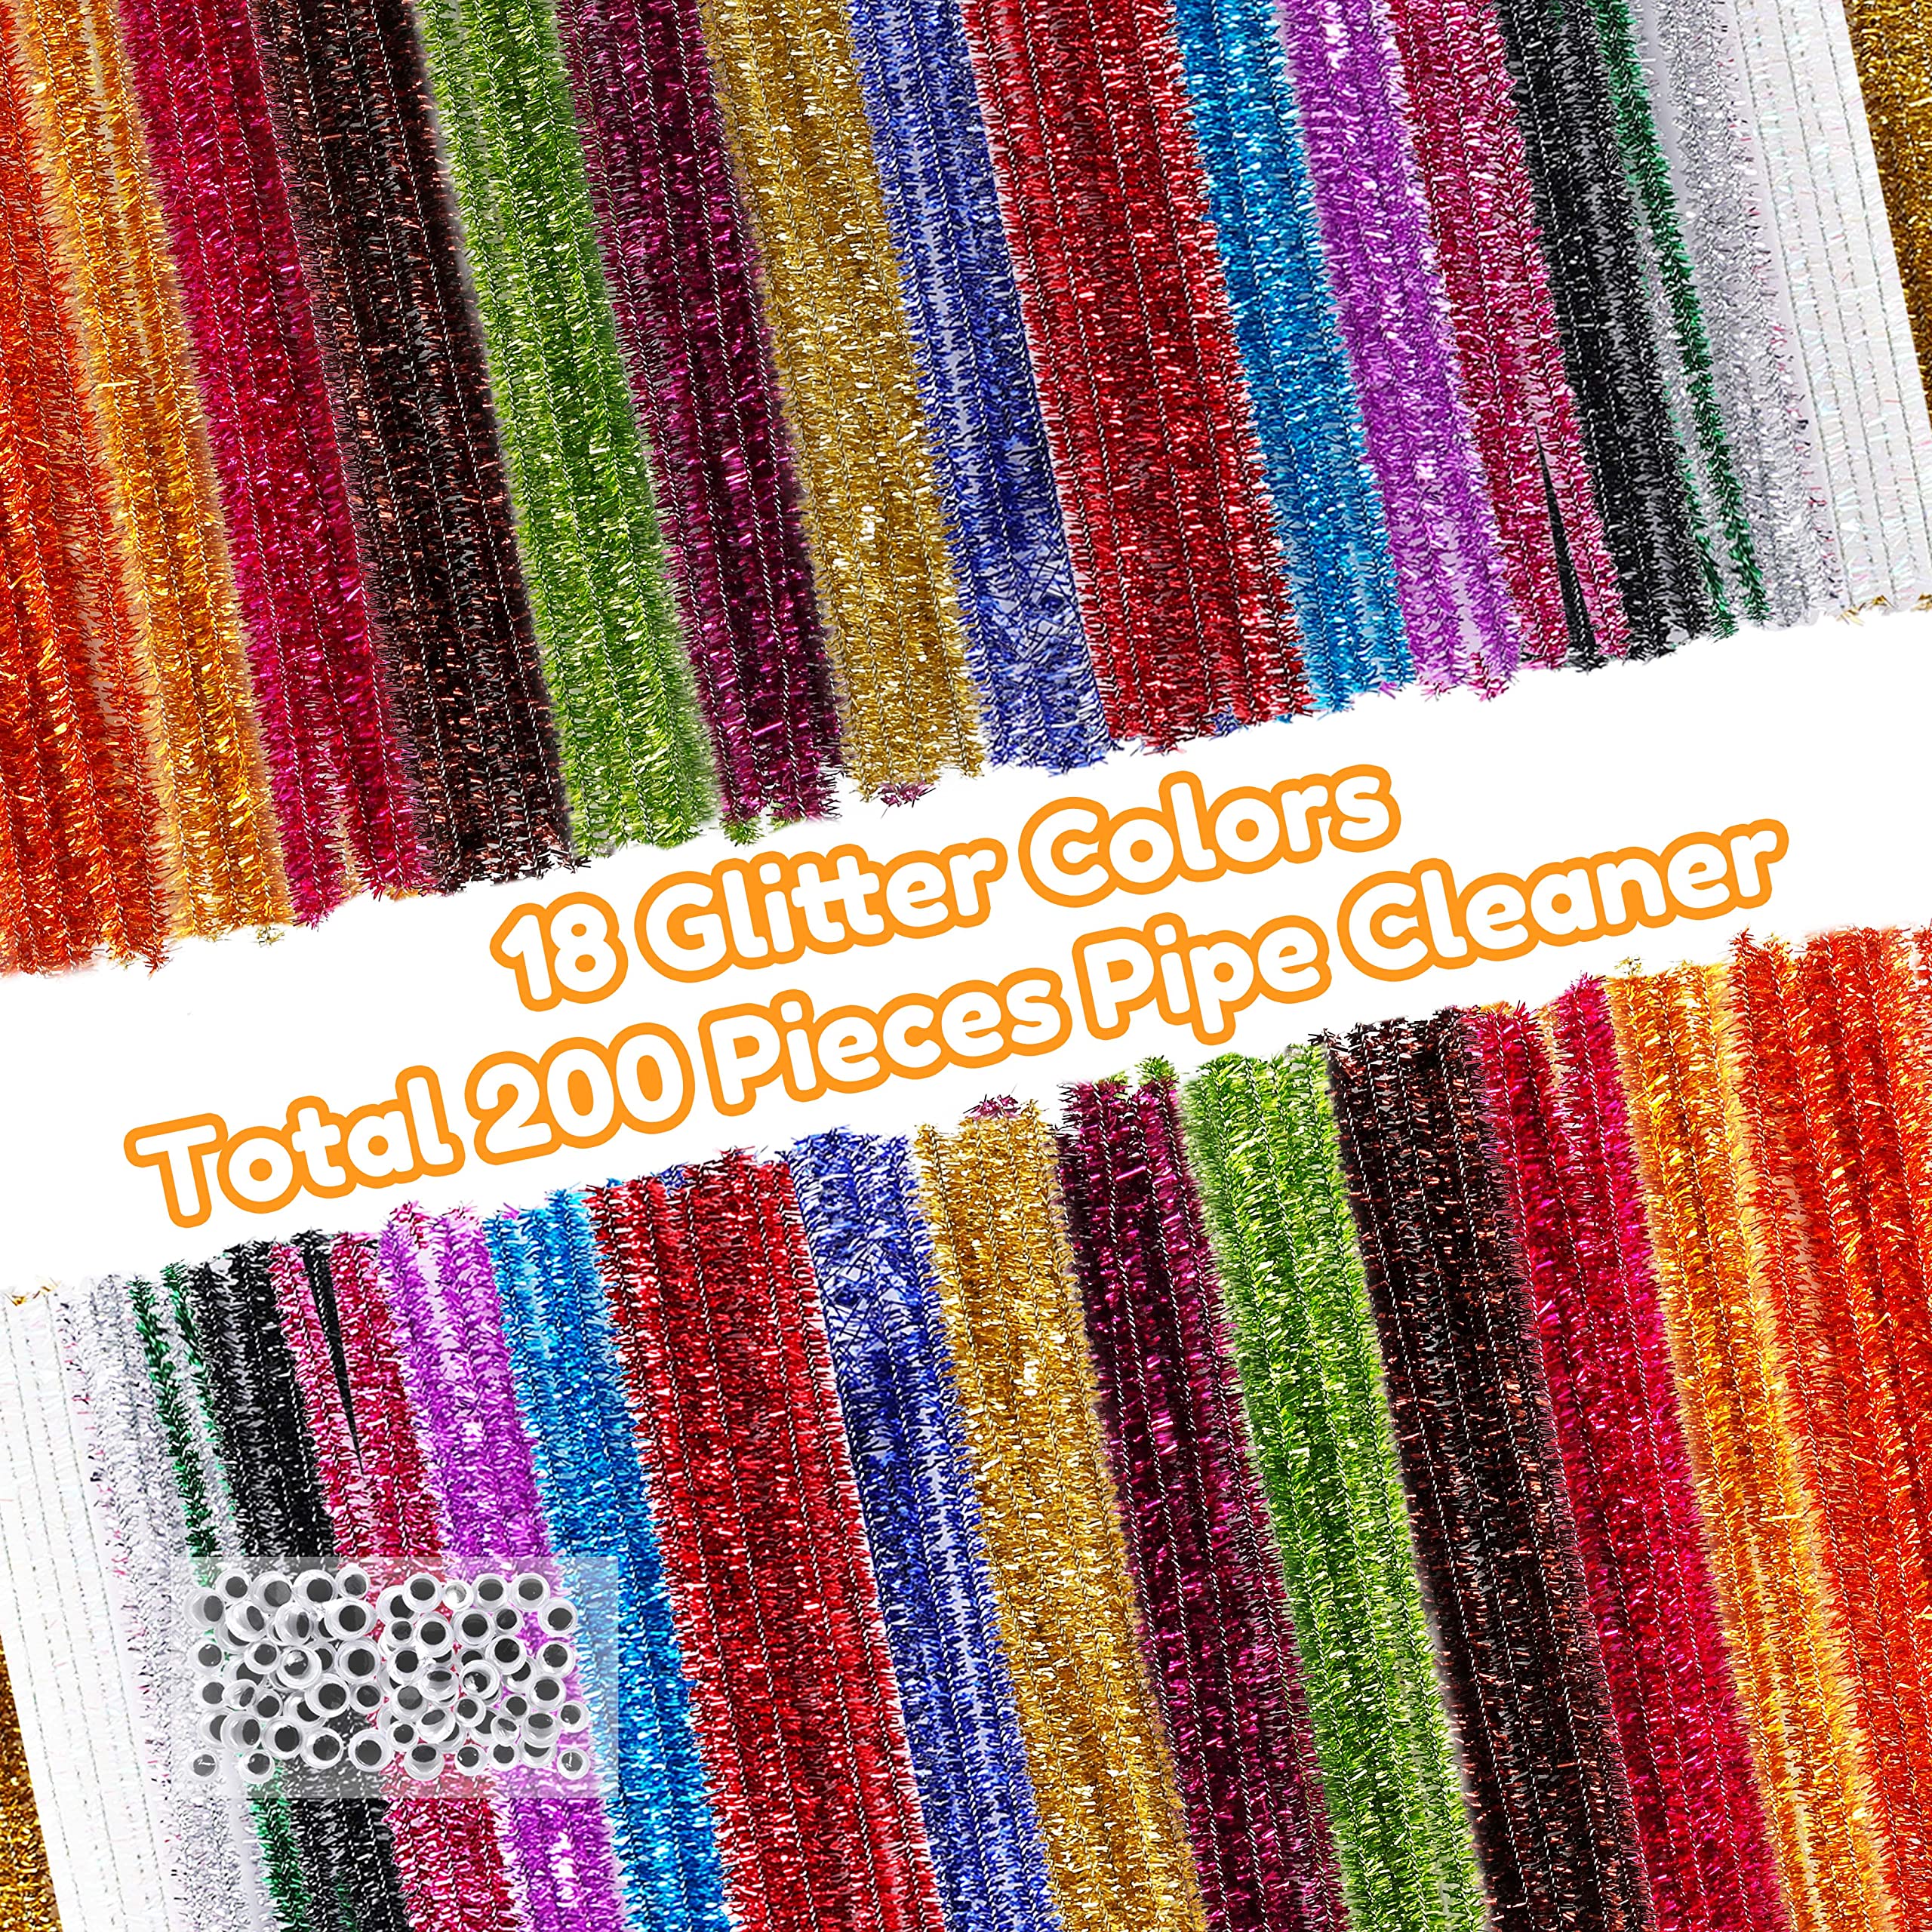 Pipe Cleaners, Pipe Cleaners Craft, Arts and Crafts, Crafts, Craft  Supplies, Art Supplies (200 Multi-Color Pipe Cleaners) 